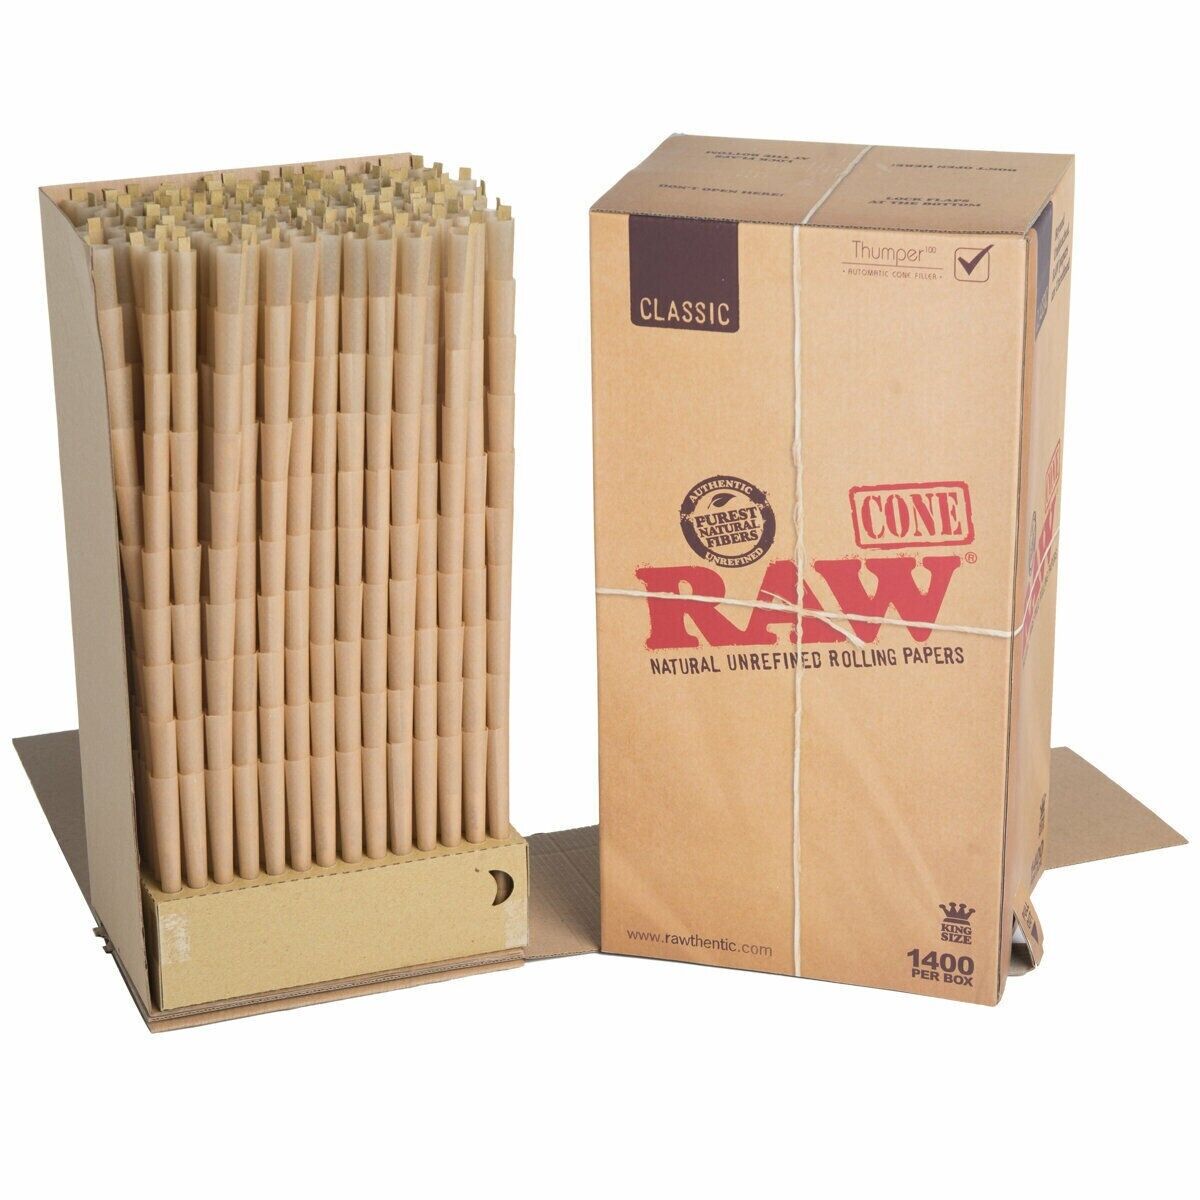 Authentic Raw King Size pre rolled Cones W/Filter tips (100 CONES) 